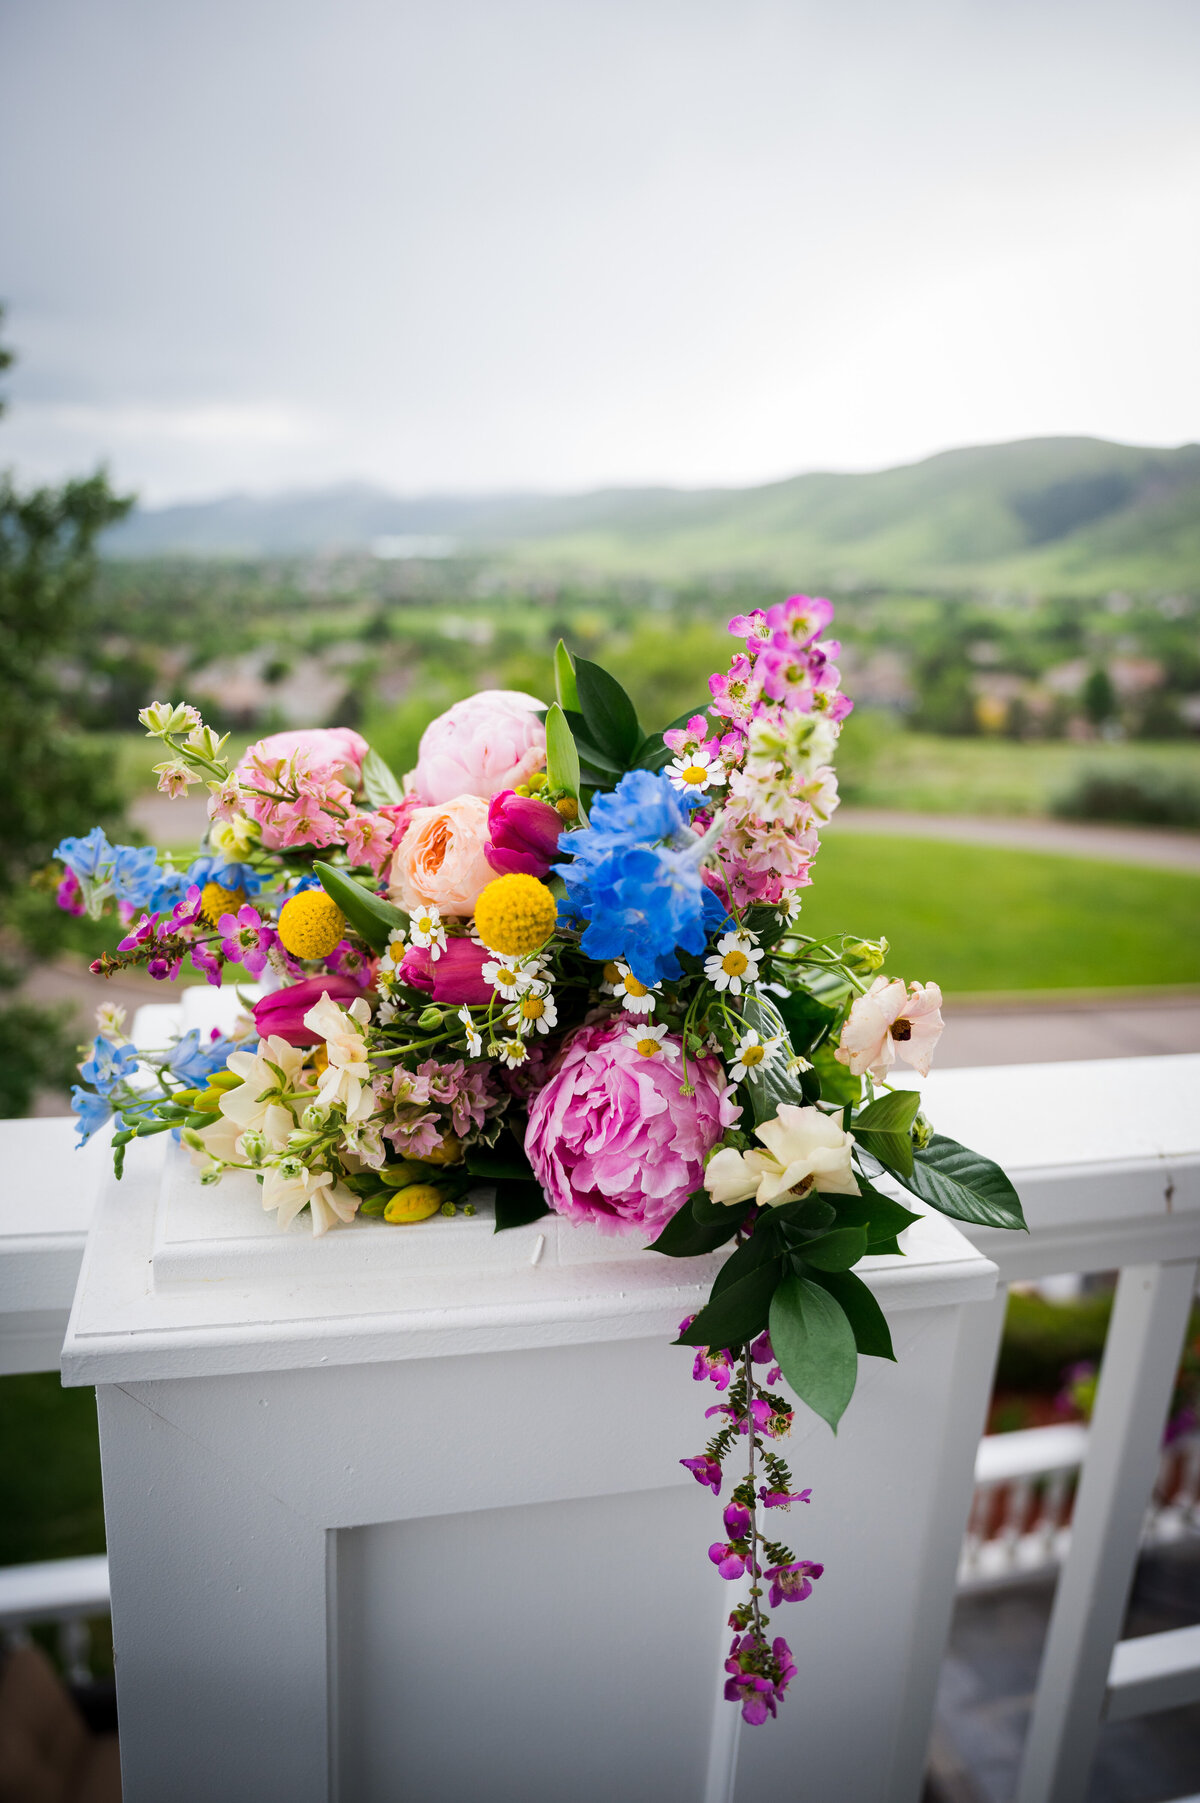 A wedding bouquet sits on a balcony with a Colorado landscape in the background.